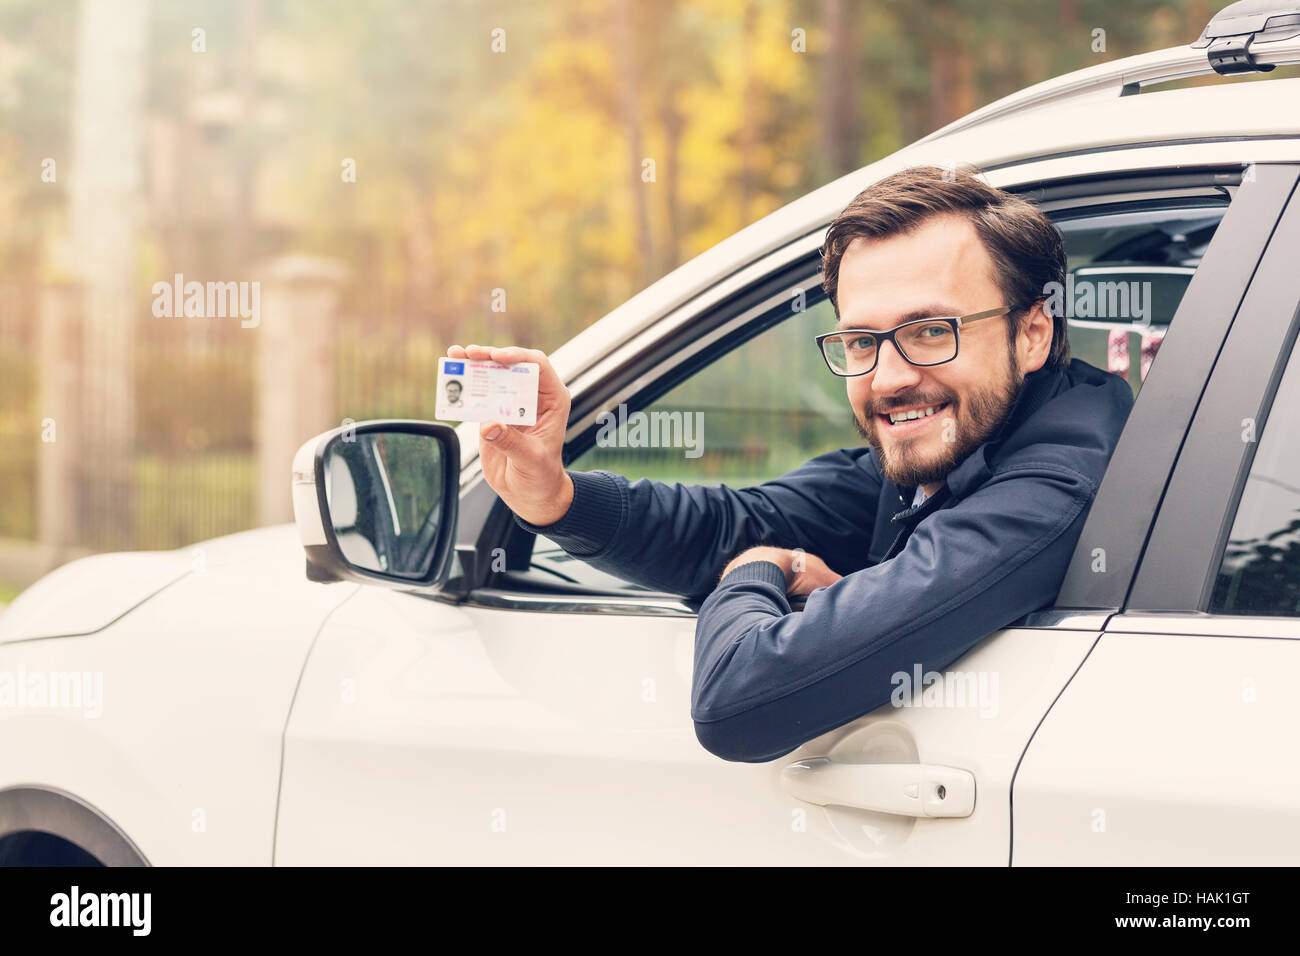 man sitting in the car and showing his driver license Stock Photo